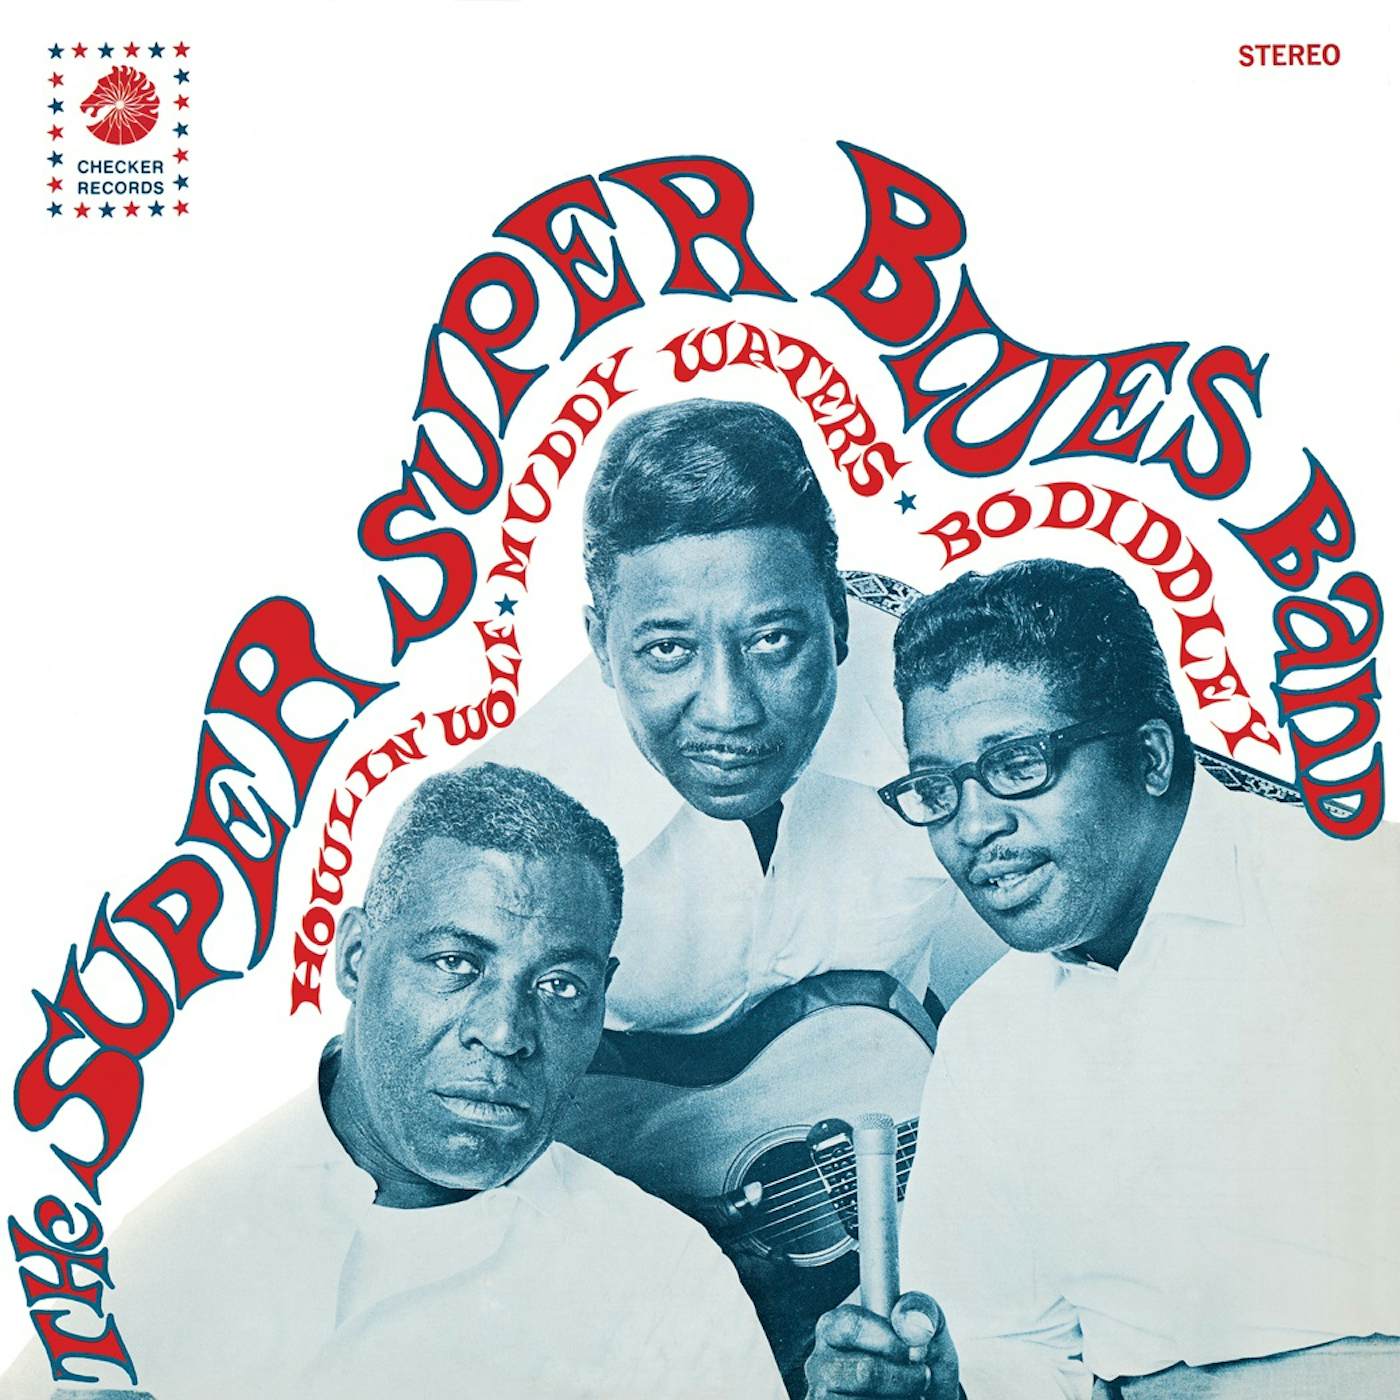 Super Super Blues Band HOWLIN' WOLF MUDDY WATERS & BO DIDDLEY Vinyl Record